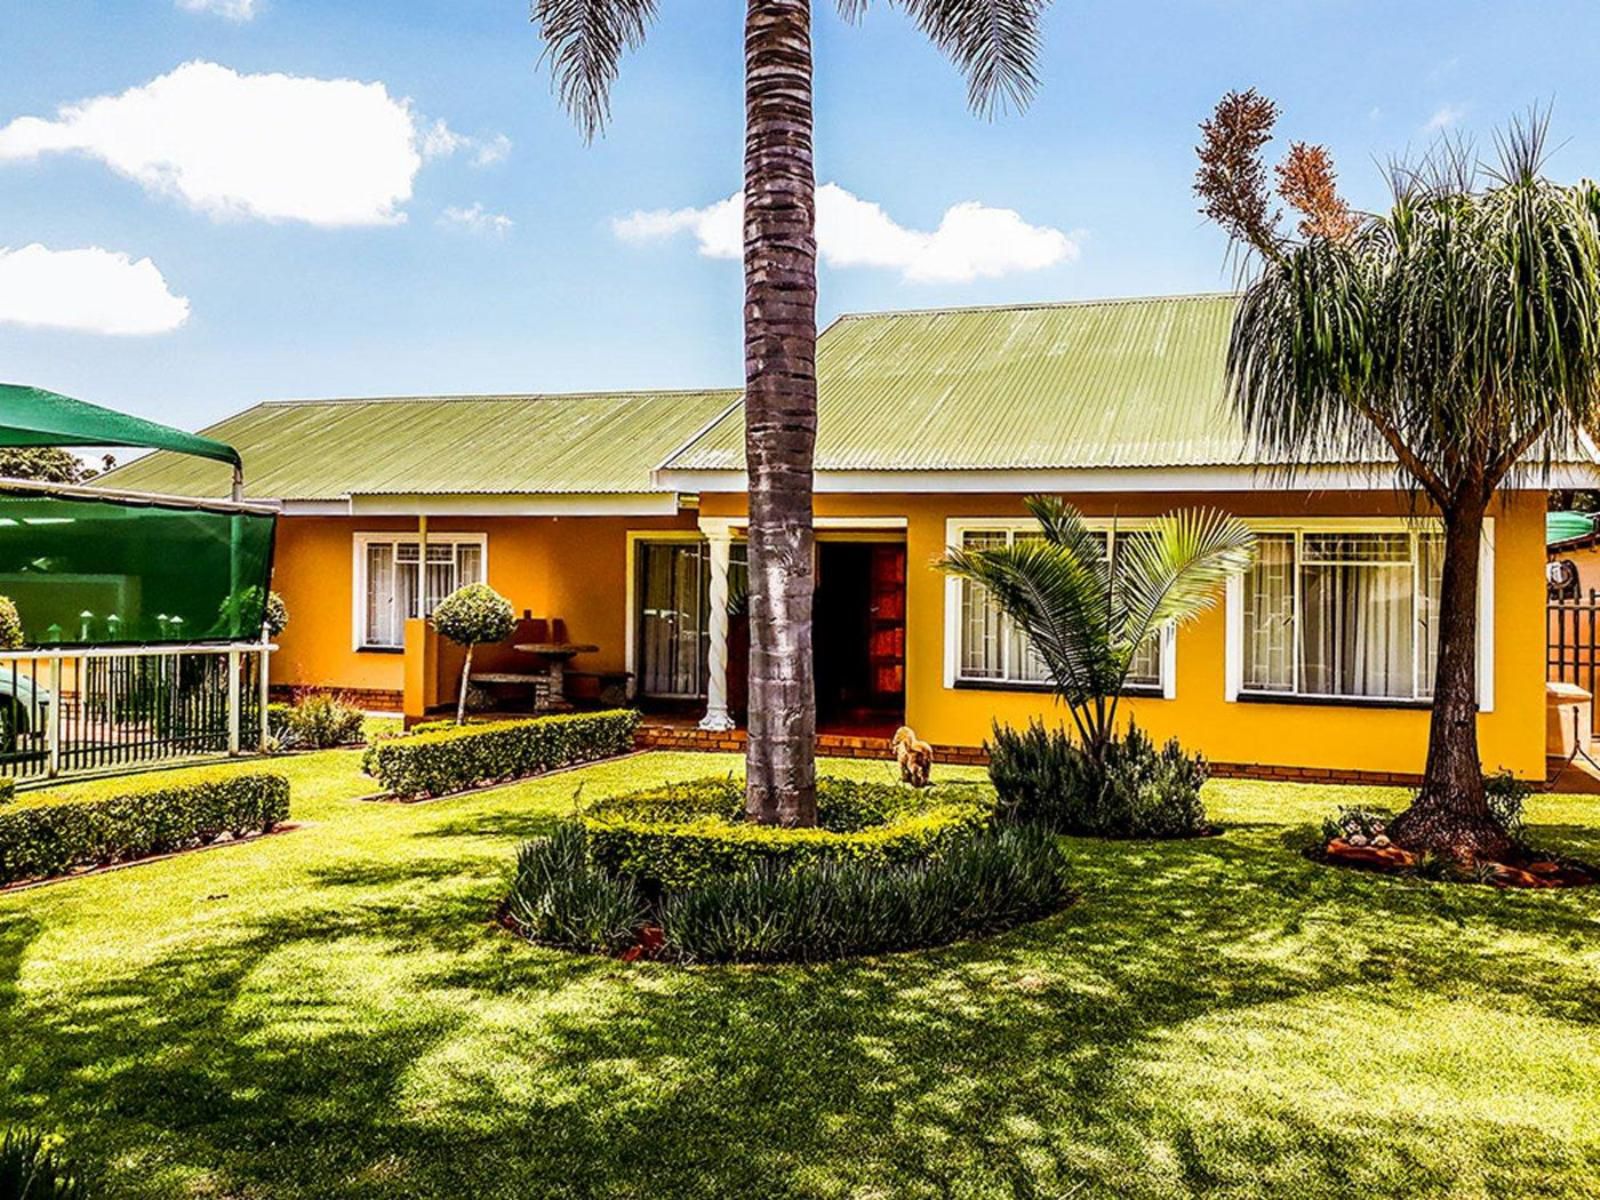 Mia Casa Guest House Mookgopong Naboomspruit Limpopo Province South Africa Complementary Colors, House, Building, Architecture, Palm Tree, Plant, Nature, Wood